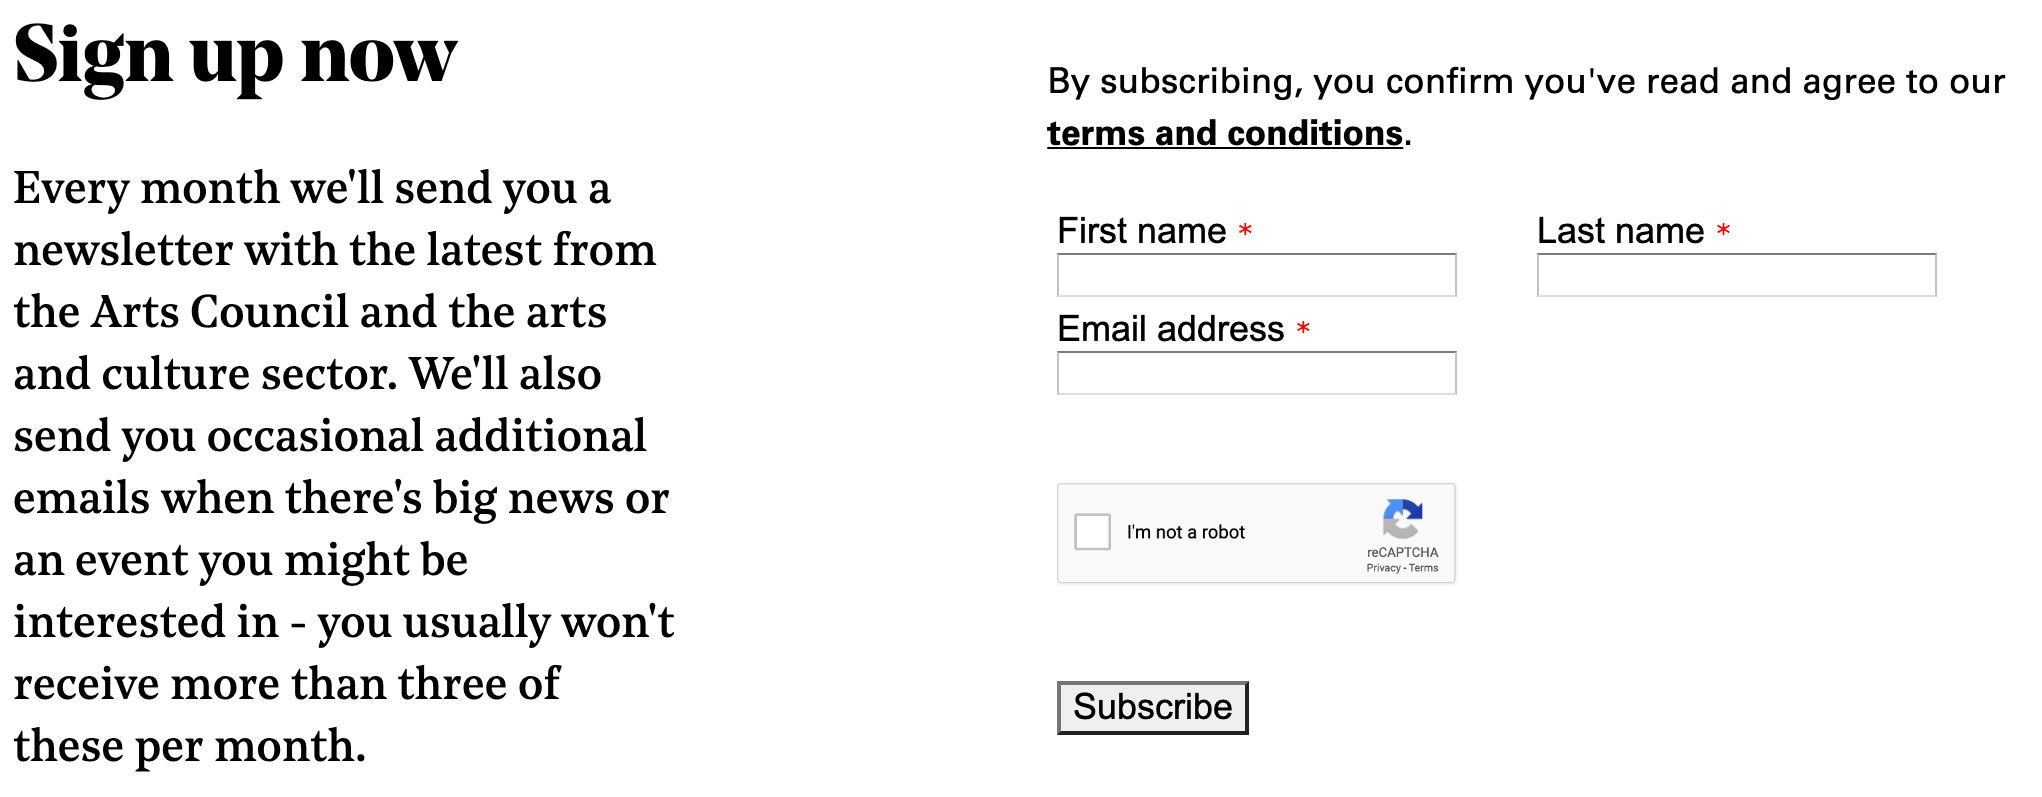 Image of Art Council England's subscription form. It lets subscribers know that they'll receive a monthly newsletter and additional emails about the organisation's events or news.